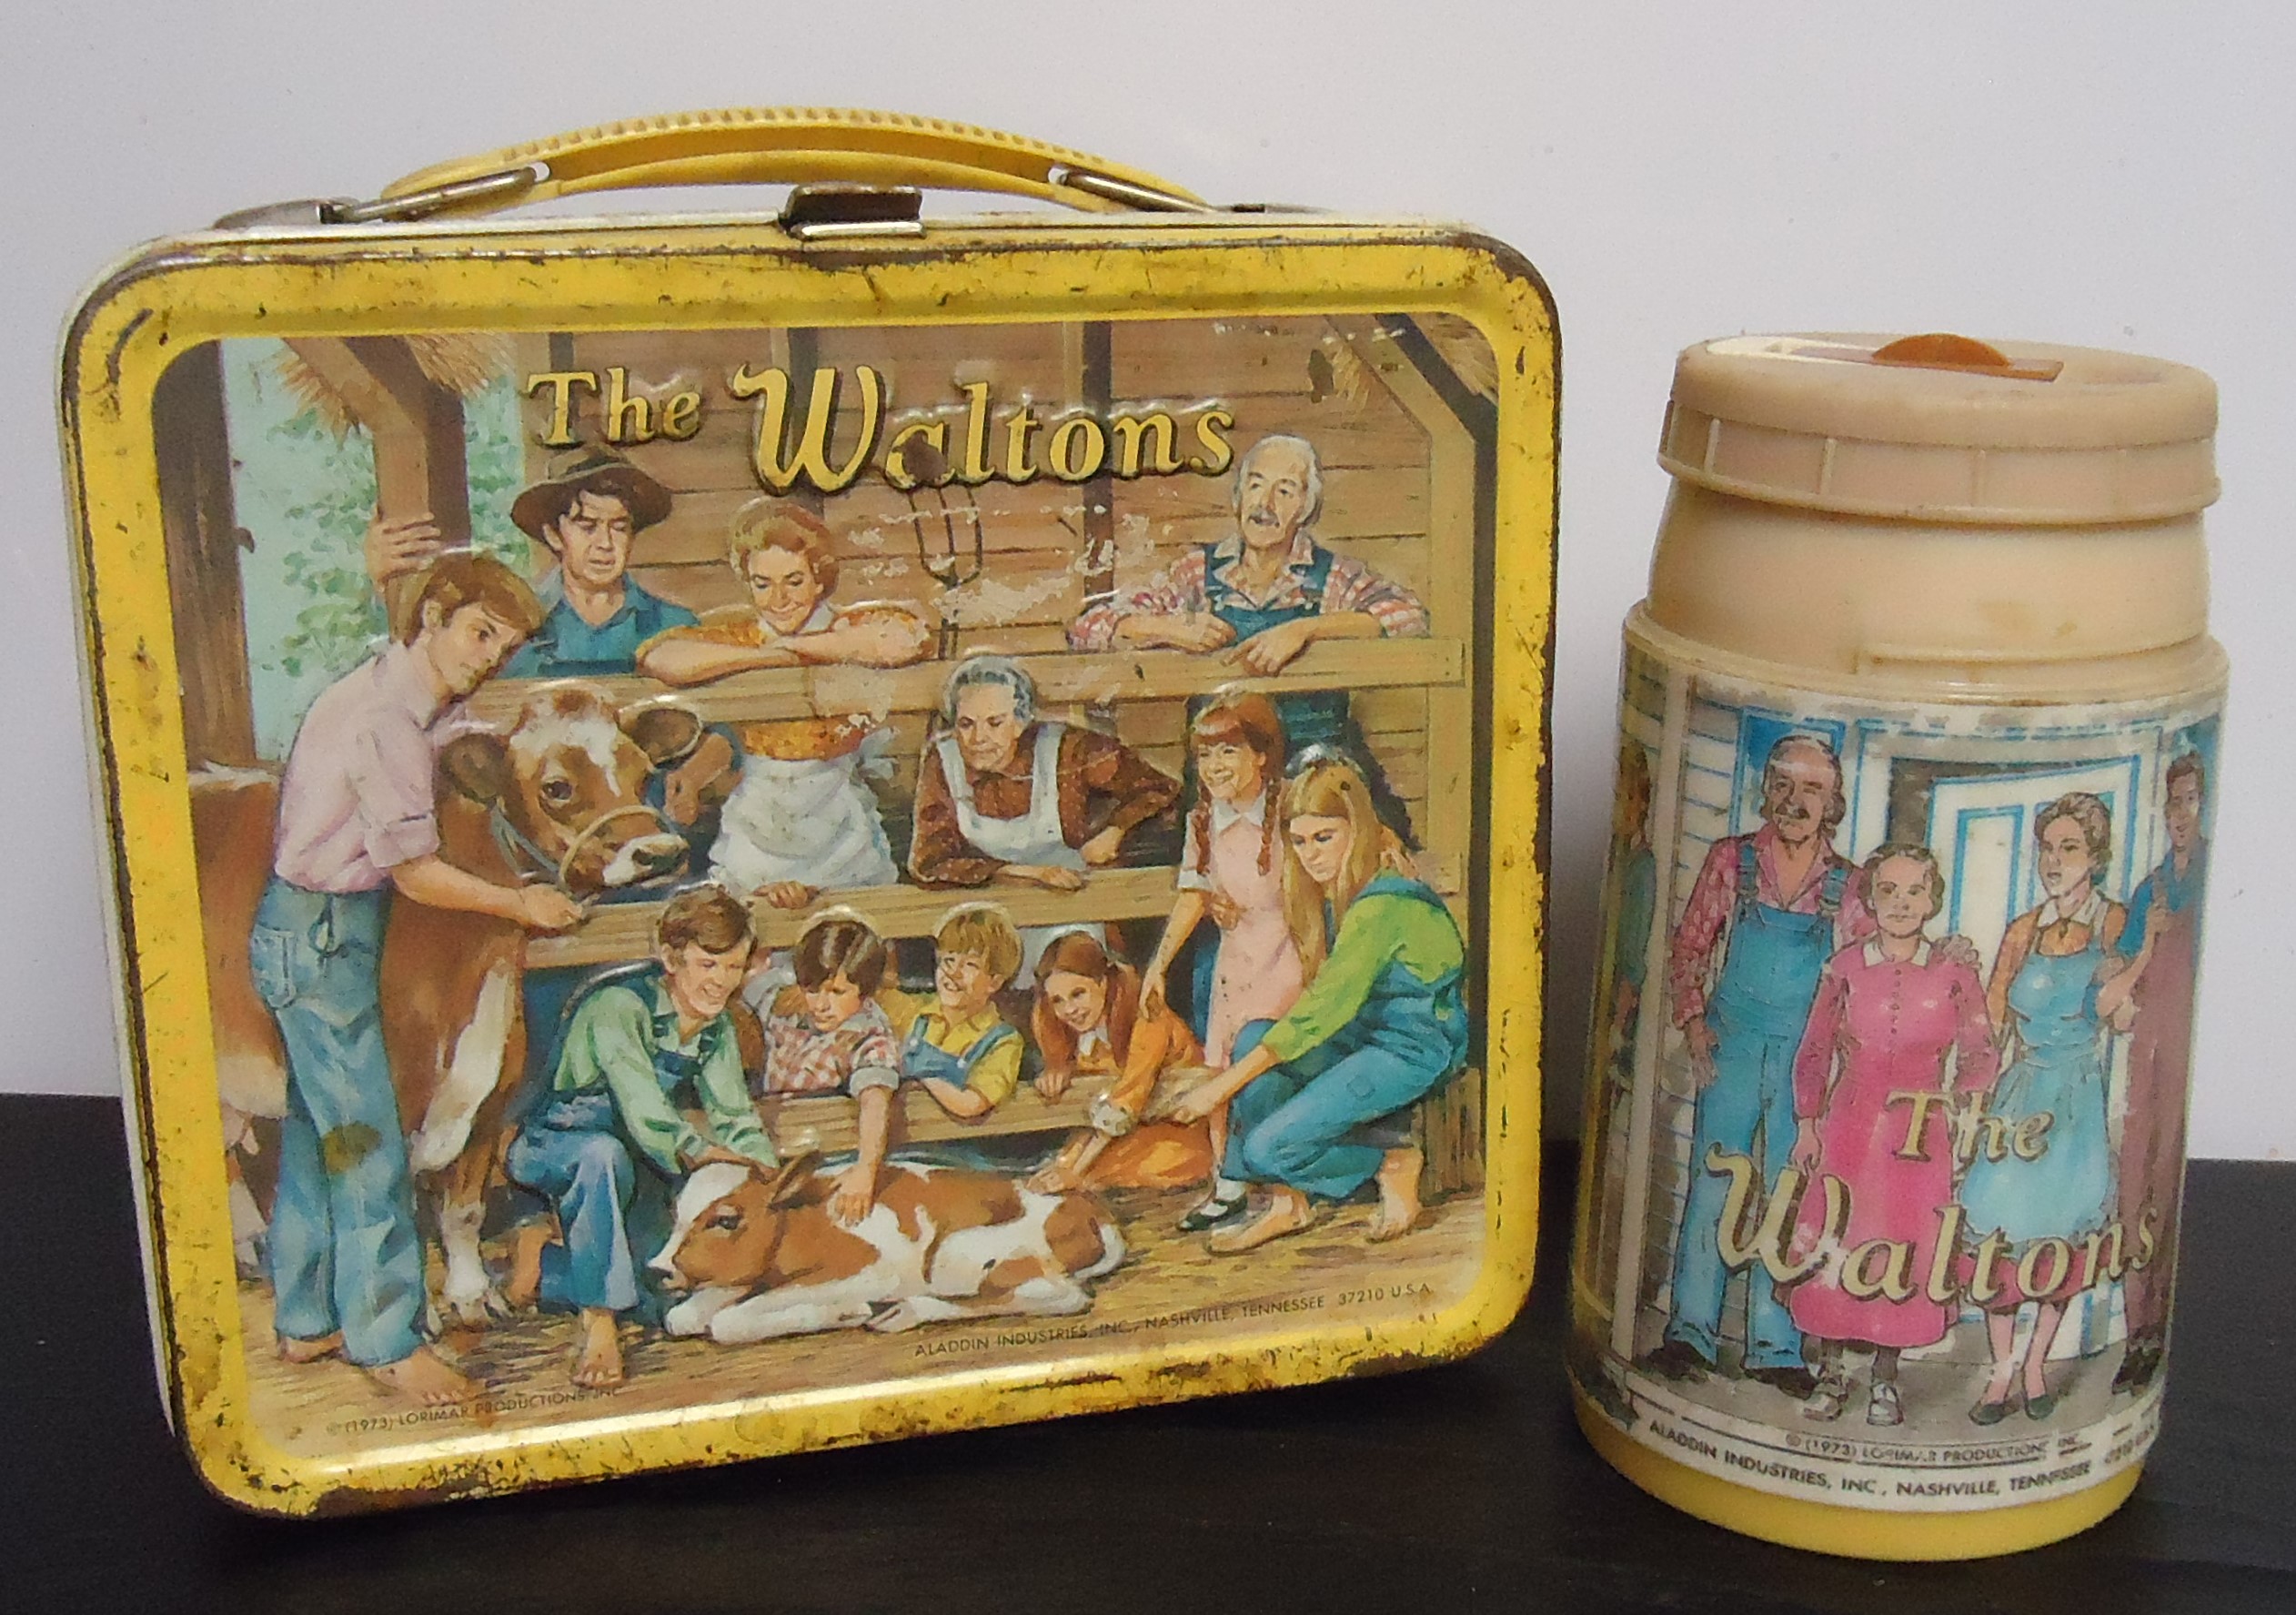 (5) "The Waltons" Metal Lunch Box
W/ Thermos
$60.00